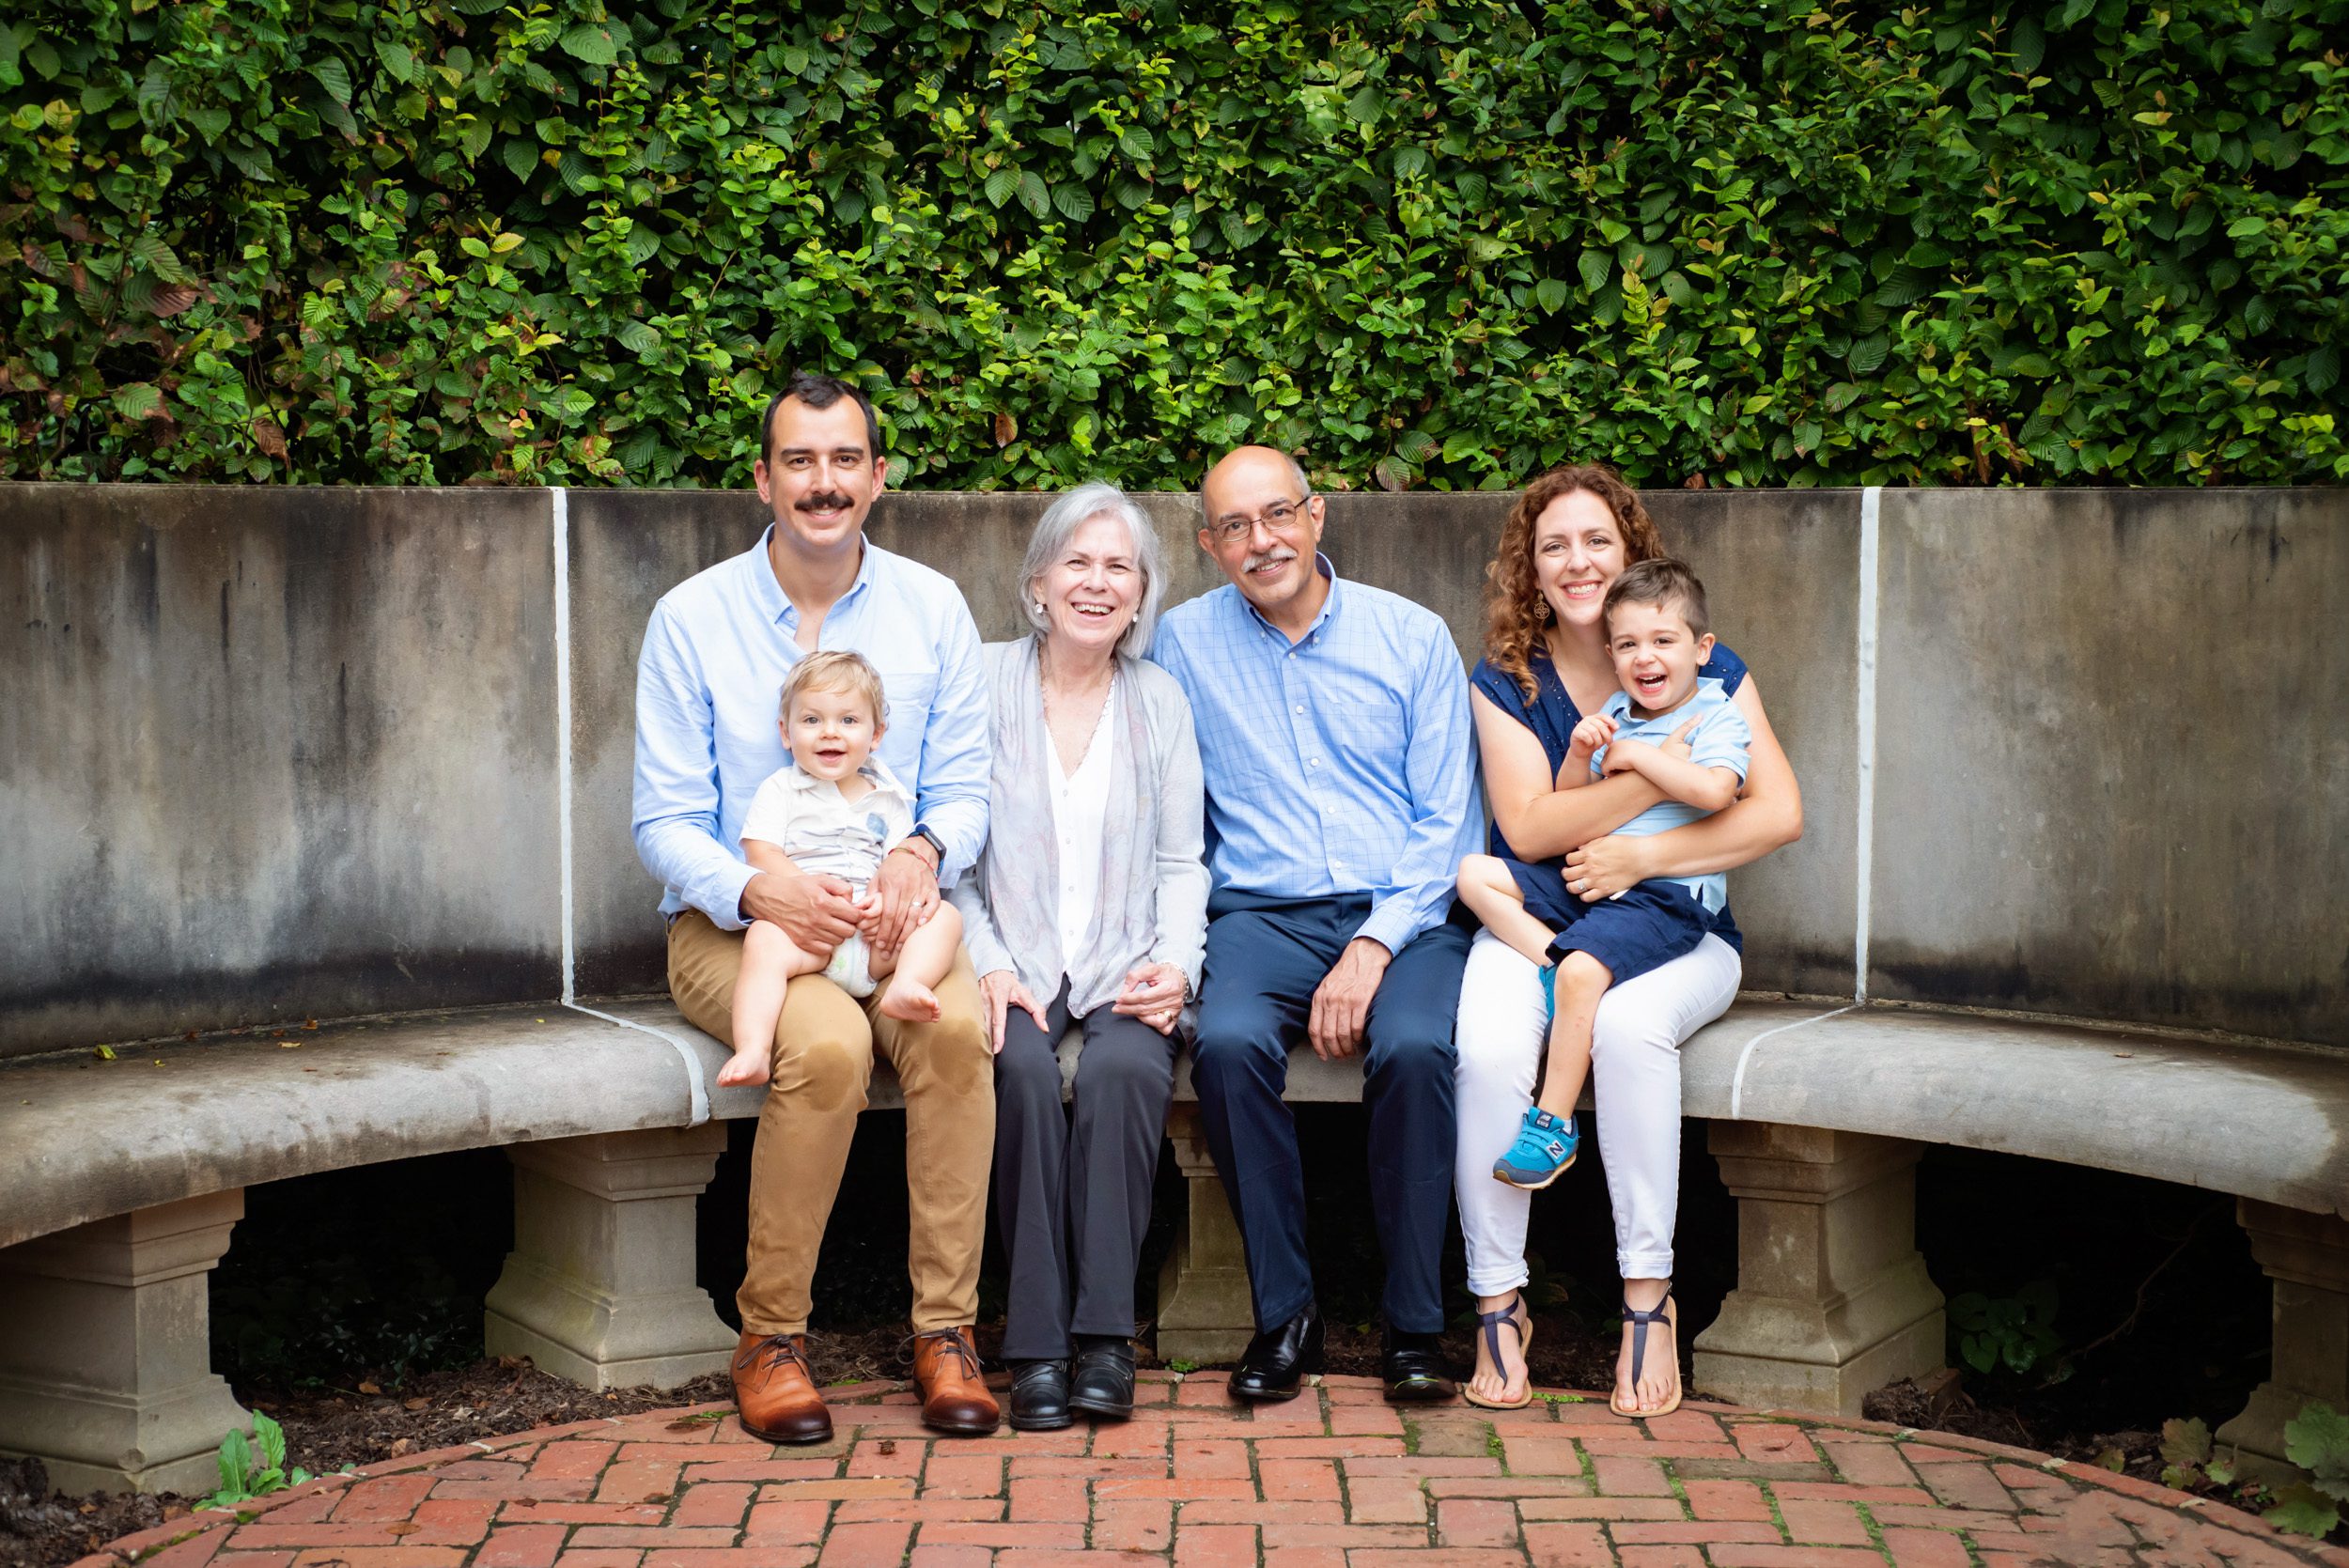 Grandparents sitting a bench with their son, daughter-in-law, and two grandsons during an extended family photoshoot